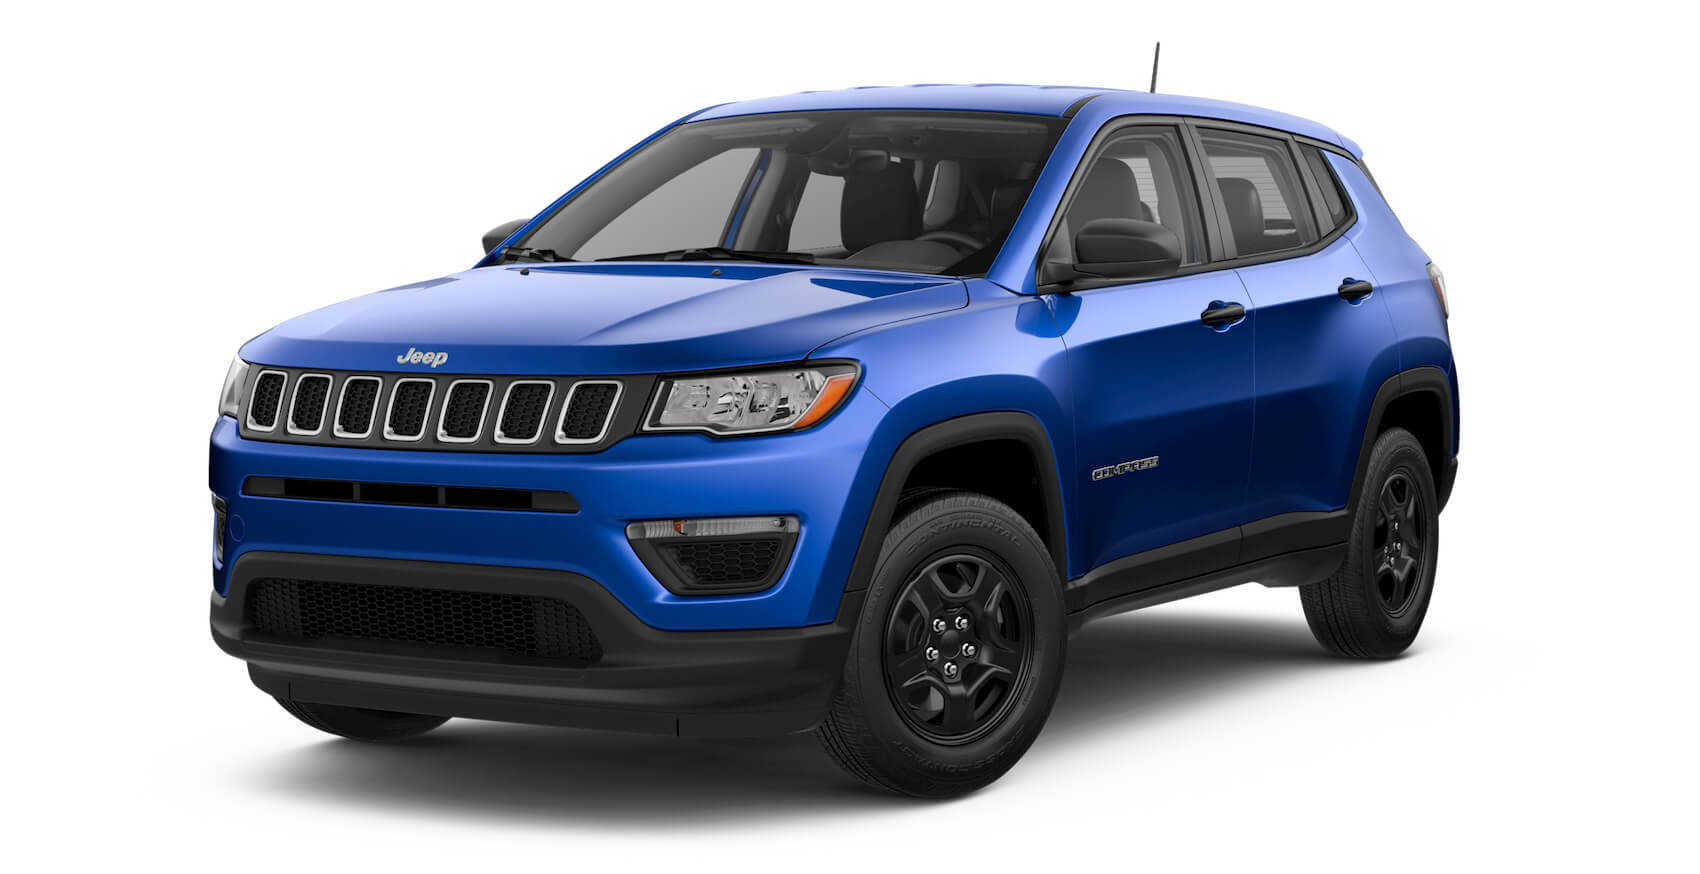 Used Jeep Compass for sale Pittston, PA